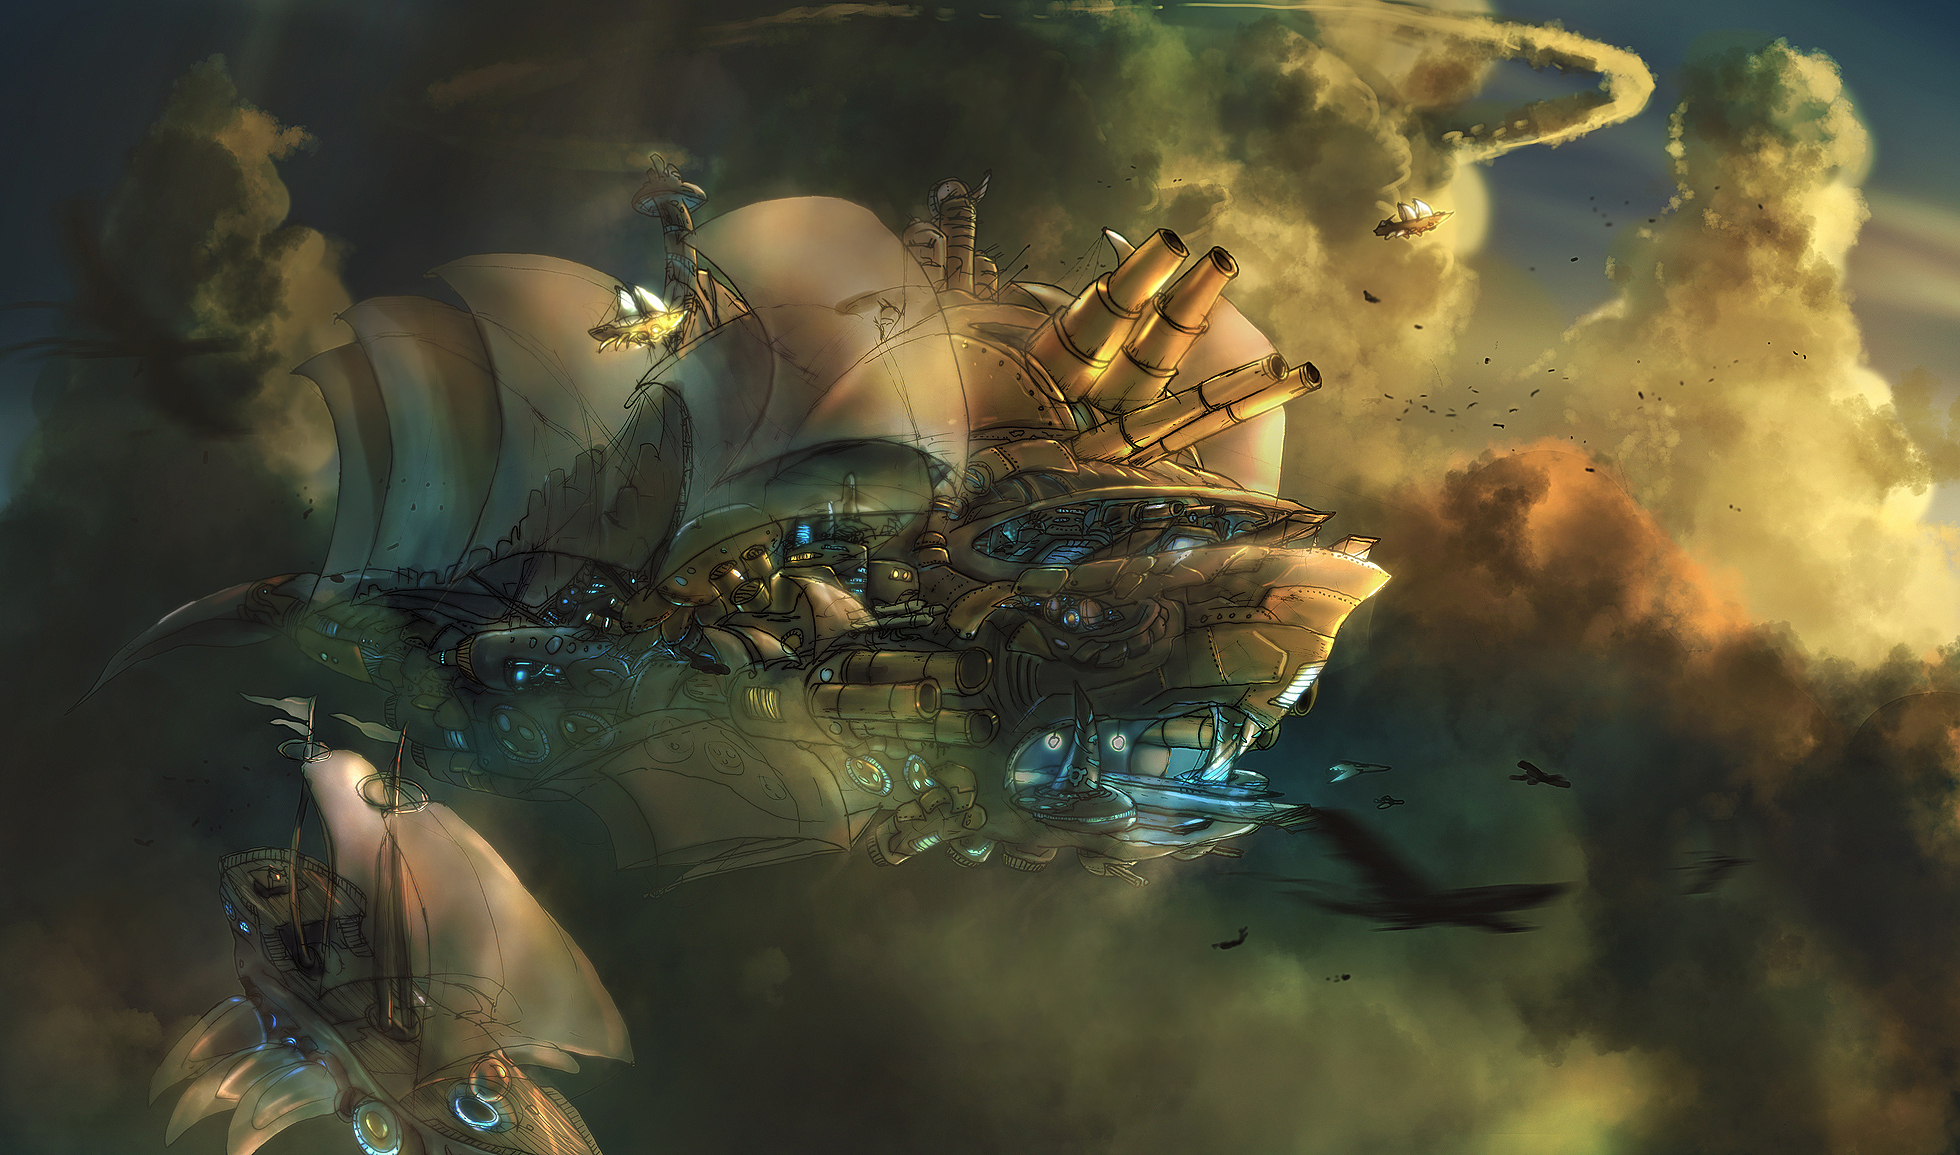 fantasy, Steampunk, Punk, Sci, Fi, Science, Fiction, Vehicles, Ships, Architecture, Cities, Sky, Clouds, Flight, Fly, Spaceship, Space, Craft, Sunlight, Sunset, Sunrise, Paintings, Artistic, Detail, Cg, Digital Wallpaper